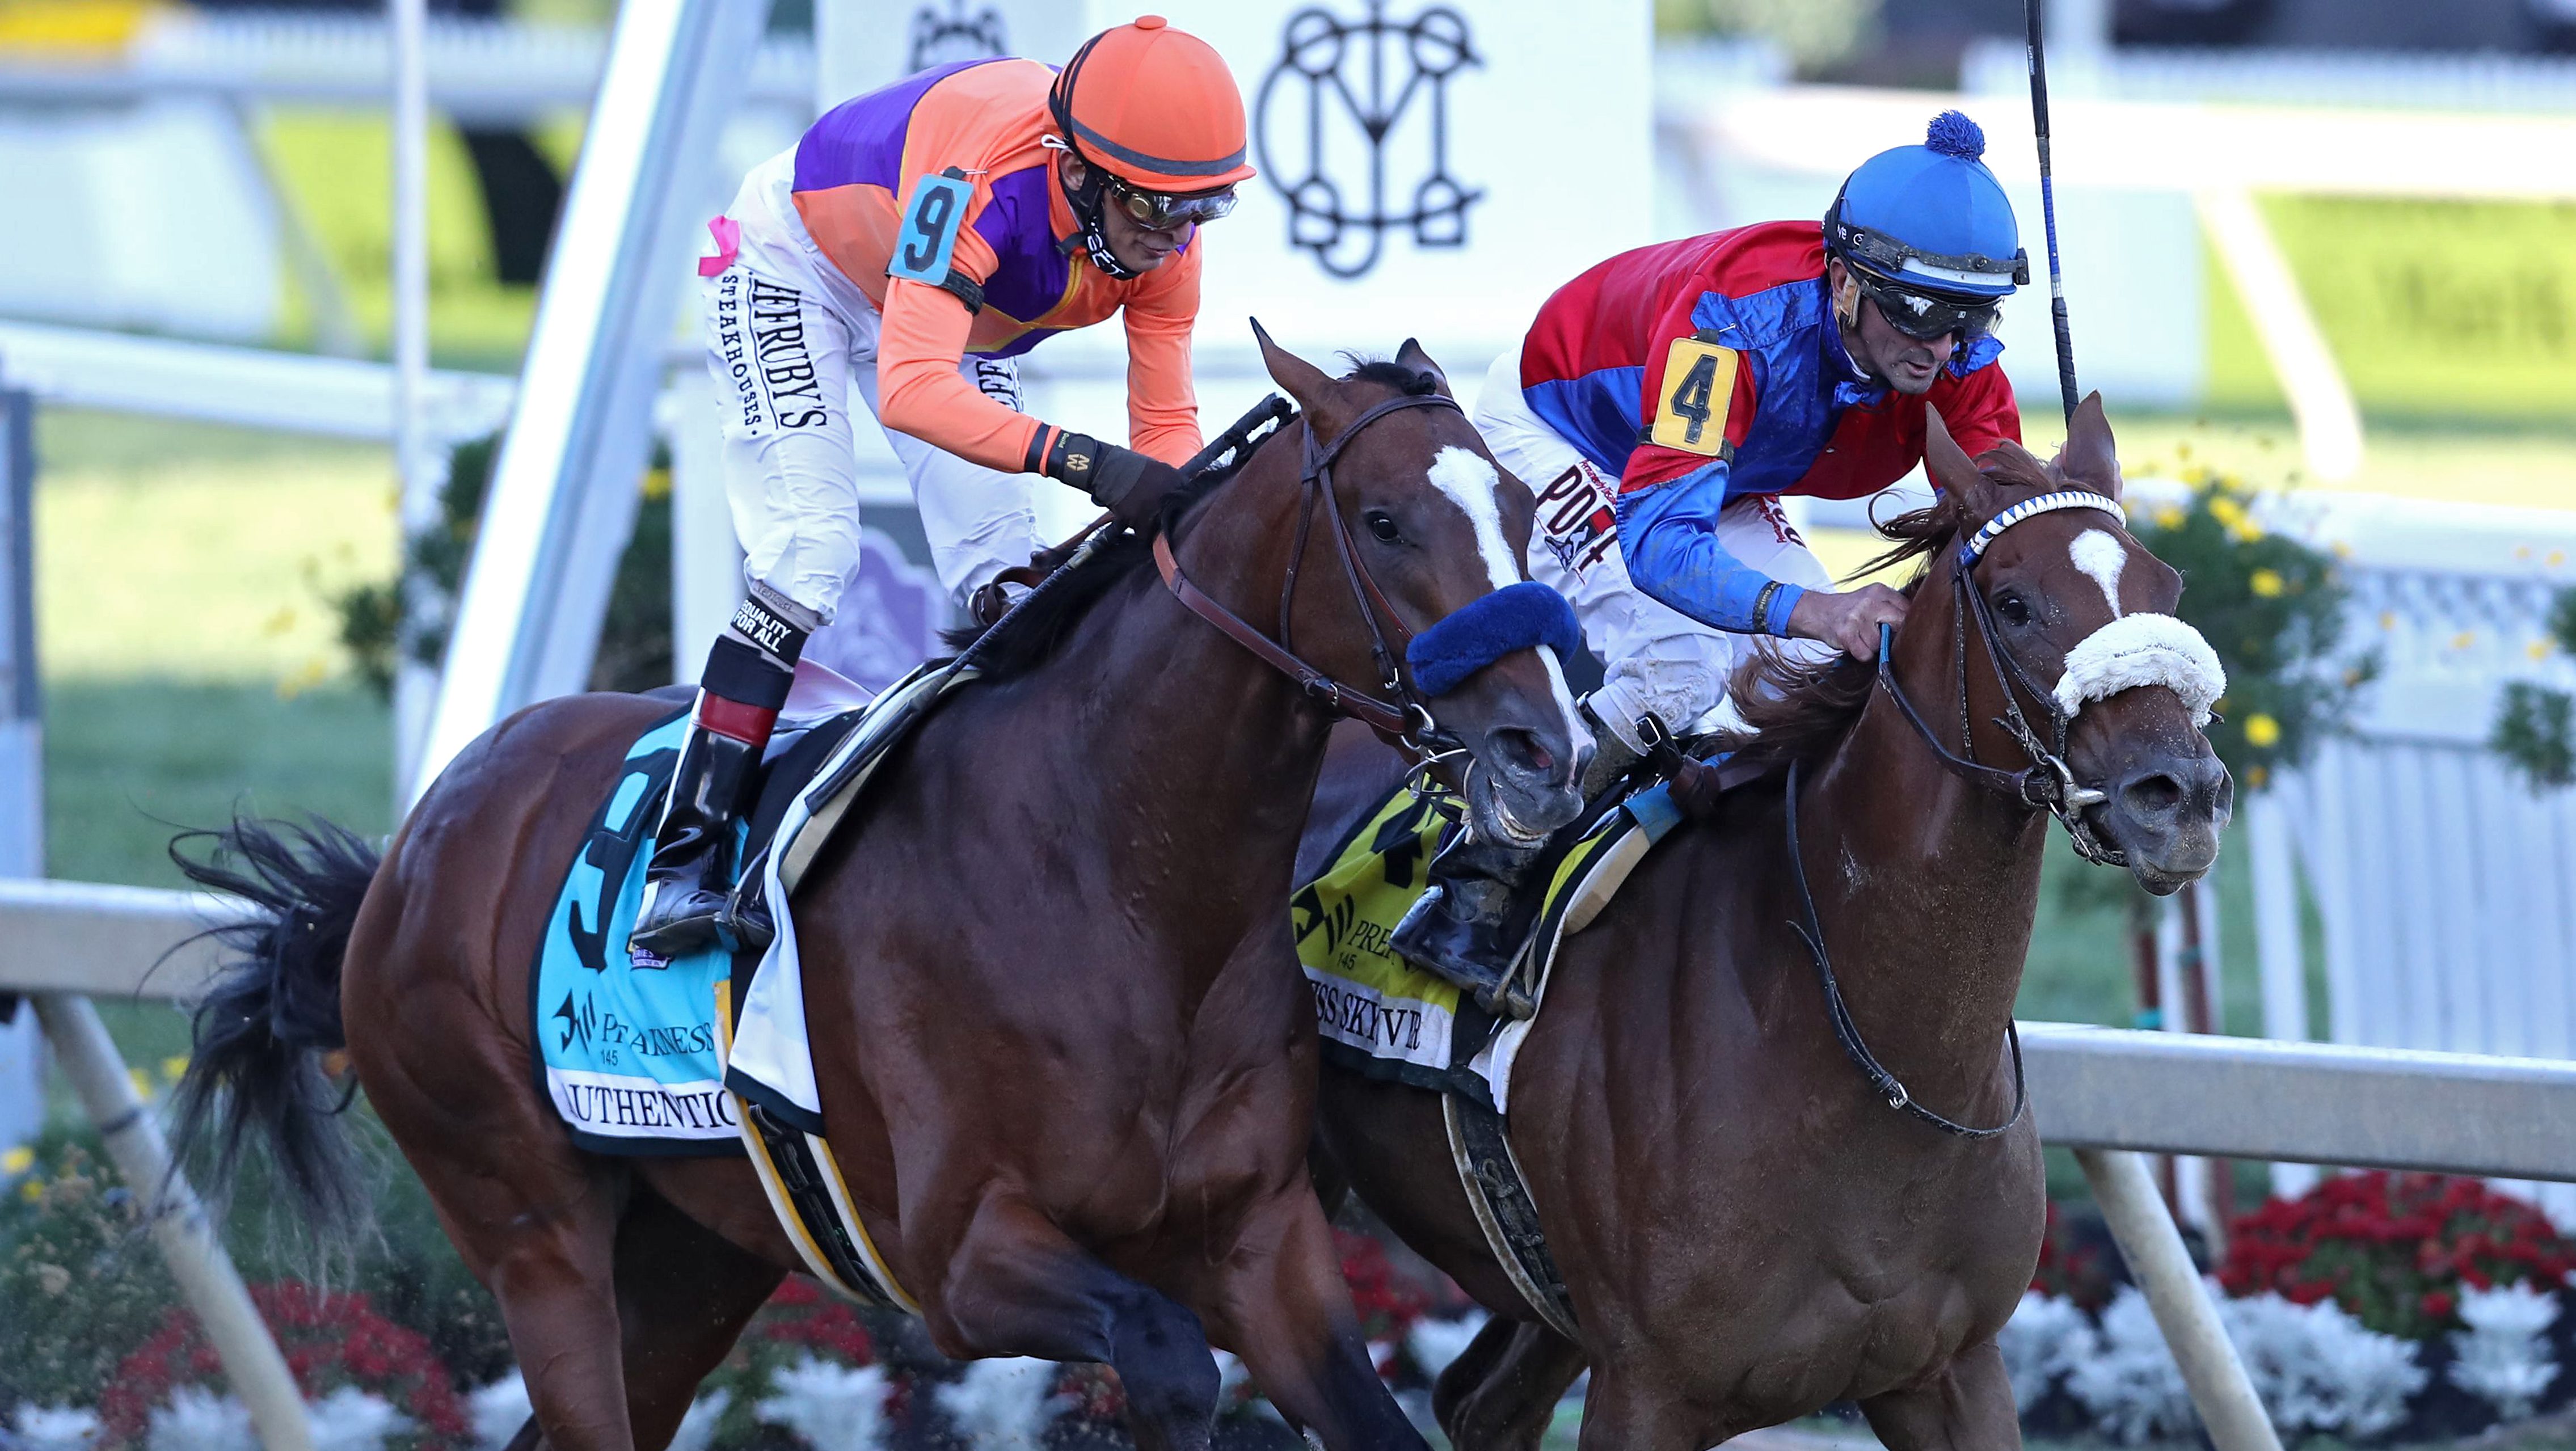 Photo: 2020 preakness results